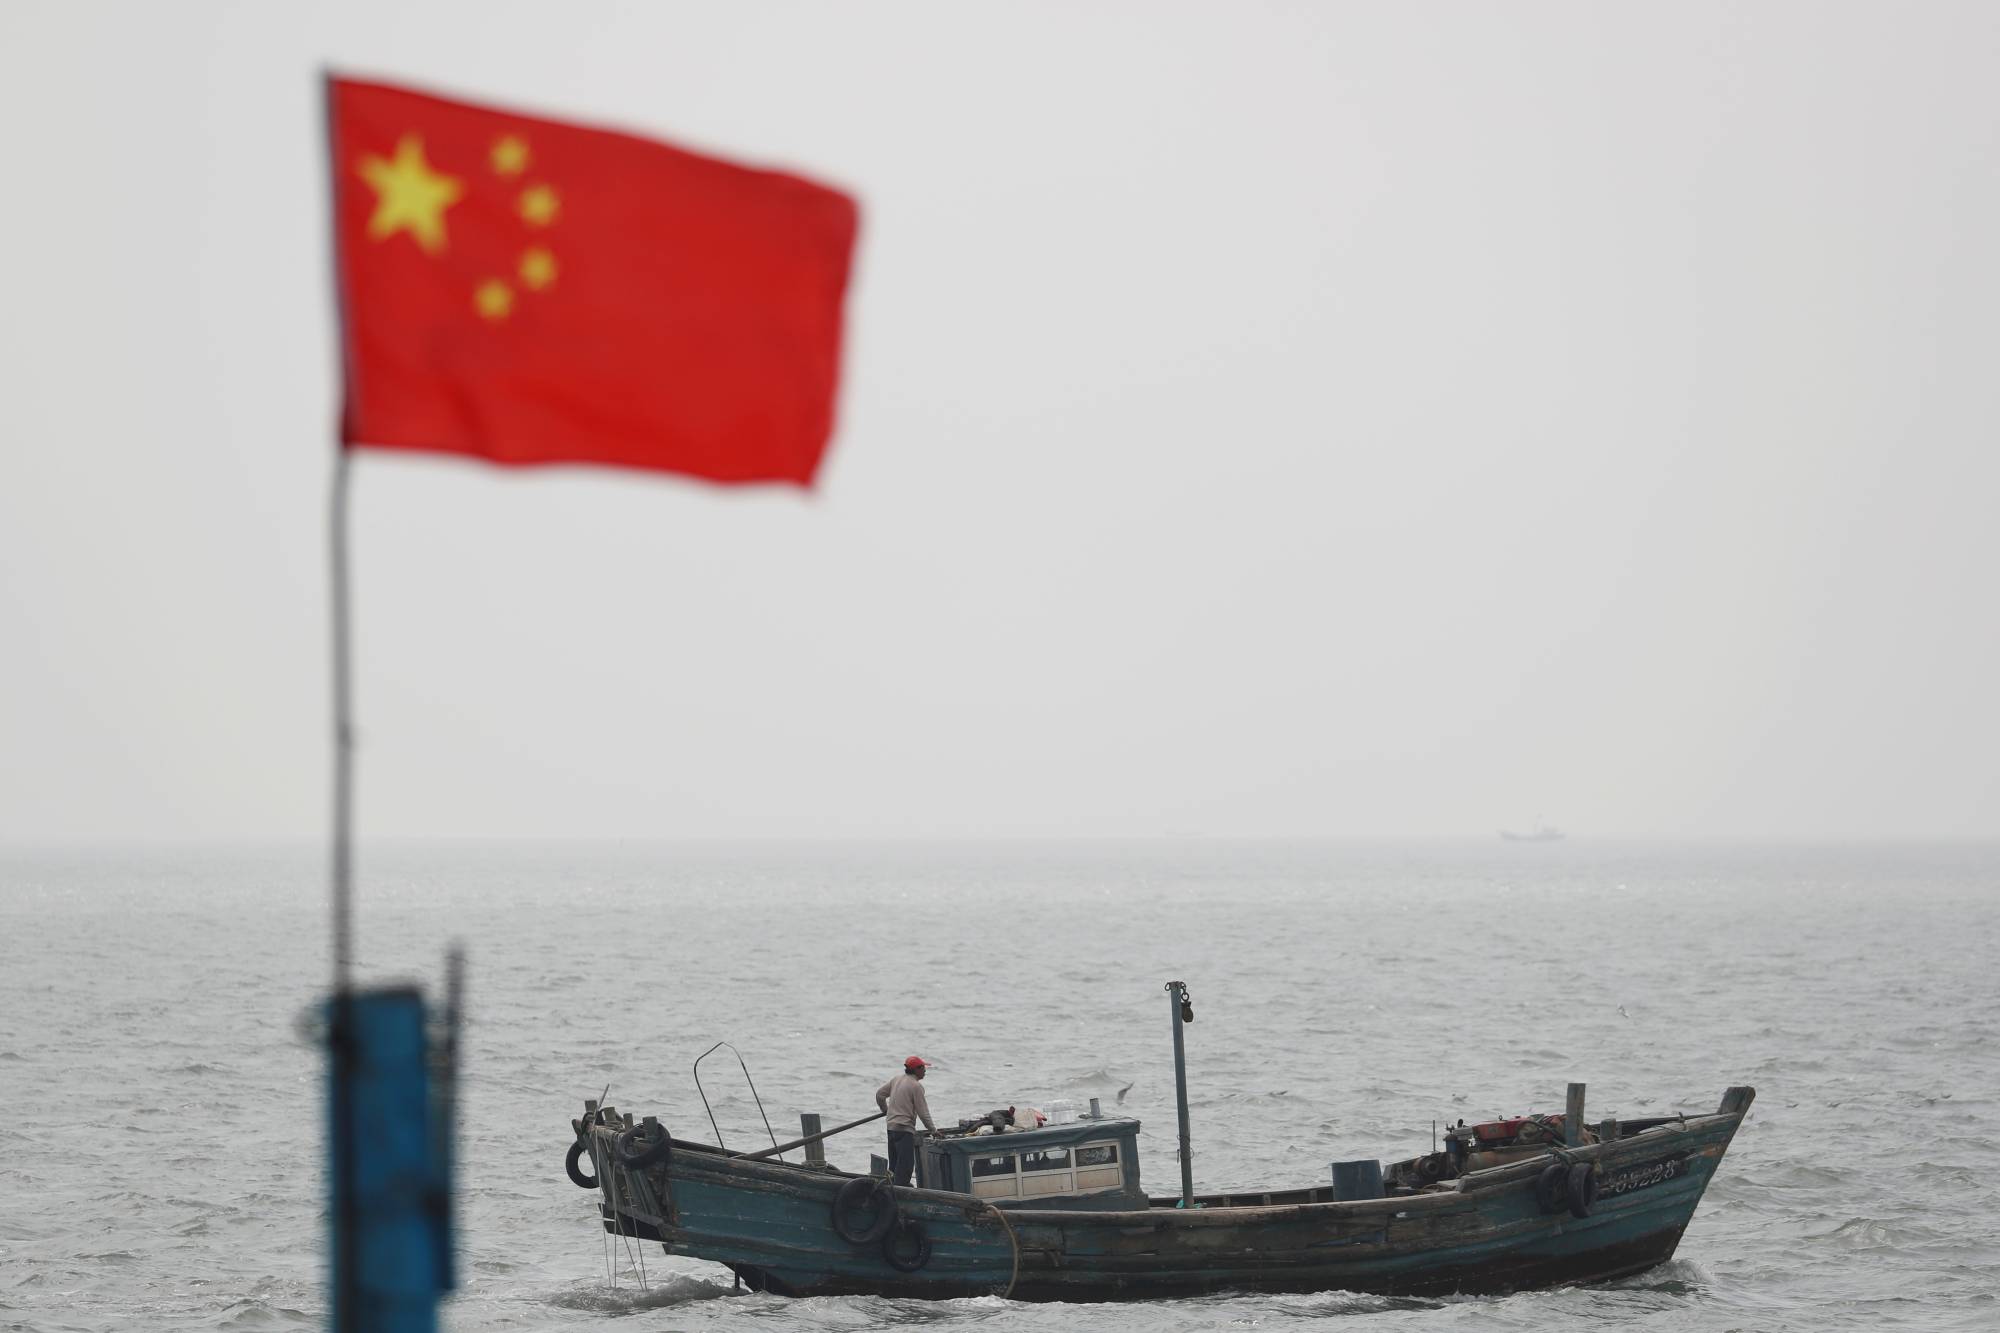 A Chinese flag is seen near a fishing boat off the coast of Qingdao, China. Members of the 'Quad' alliance plan to use satellite technology to create a tracking system for illegal fishing from the Indian Ocean to the South Pacific by connecting surveillance centers in Singapore and India. | REUTERS